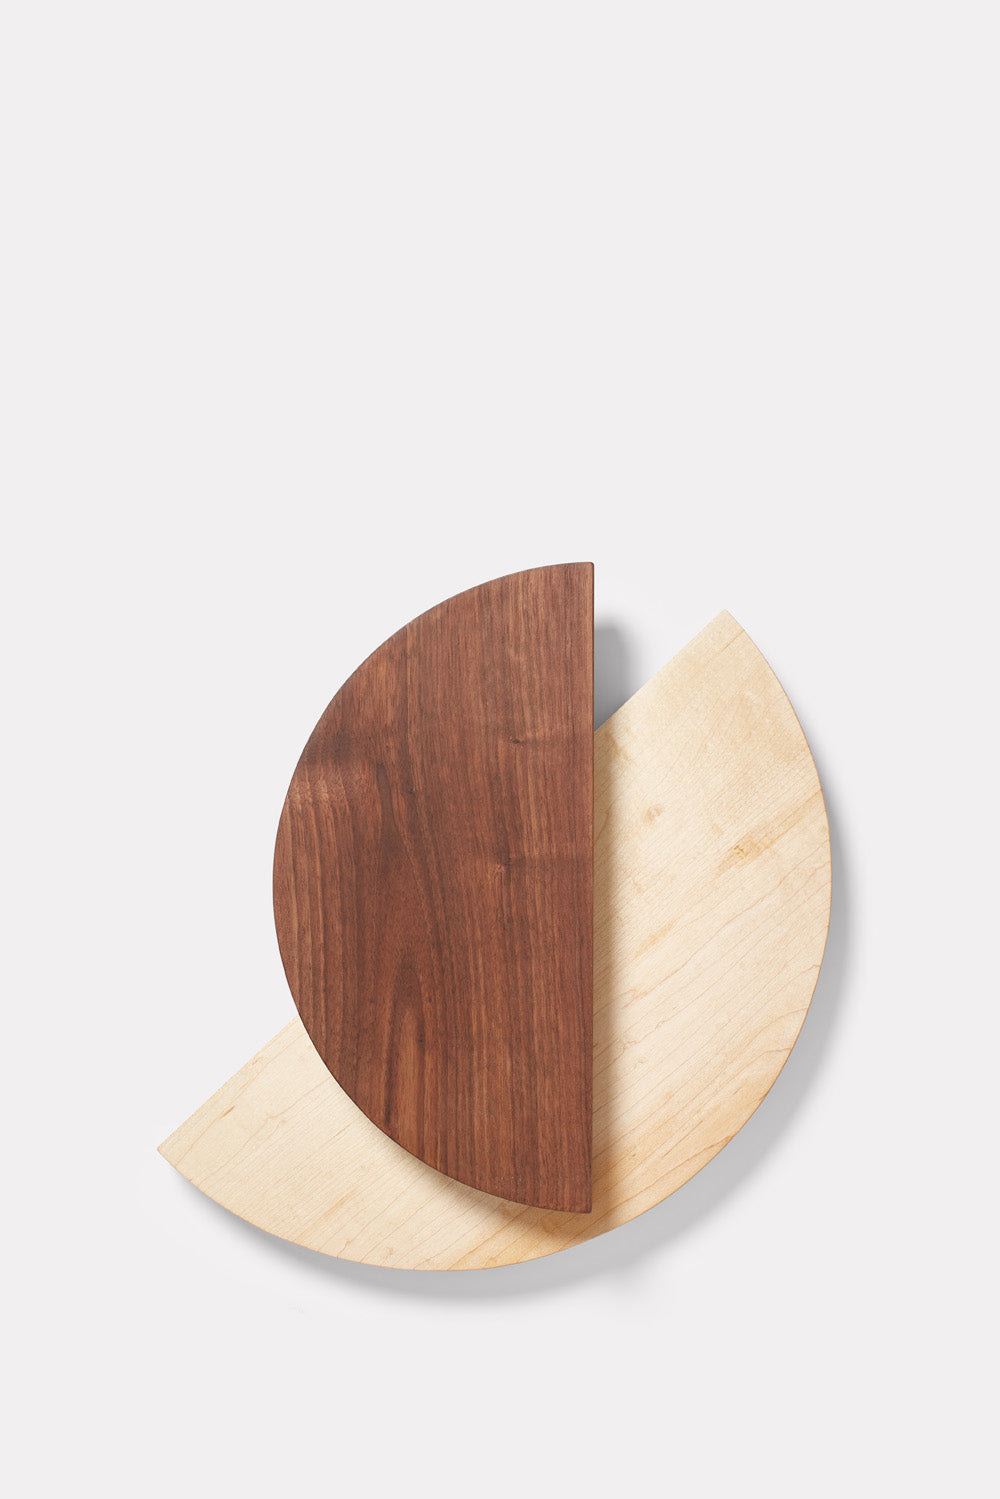 Meet the Cutting Board That Sold Out 10 Times Straight